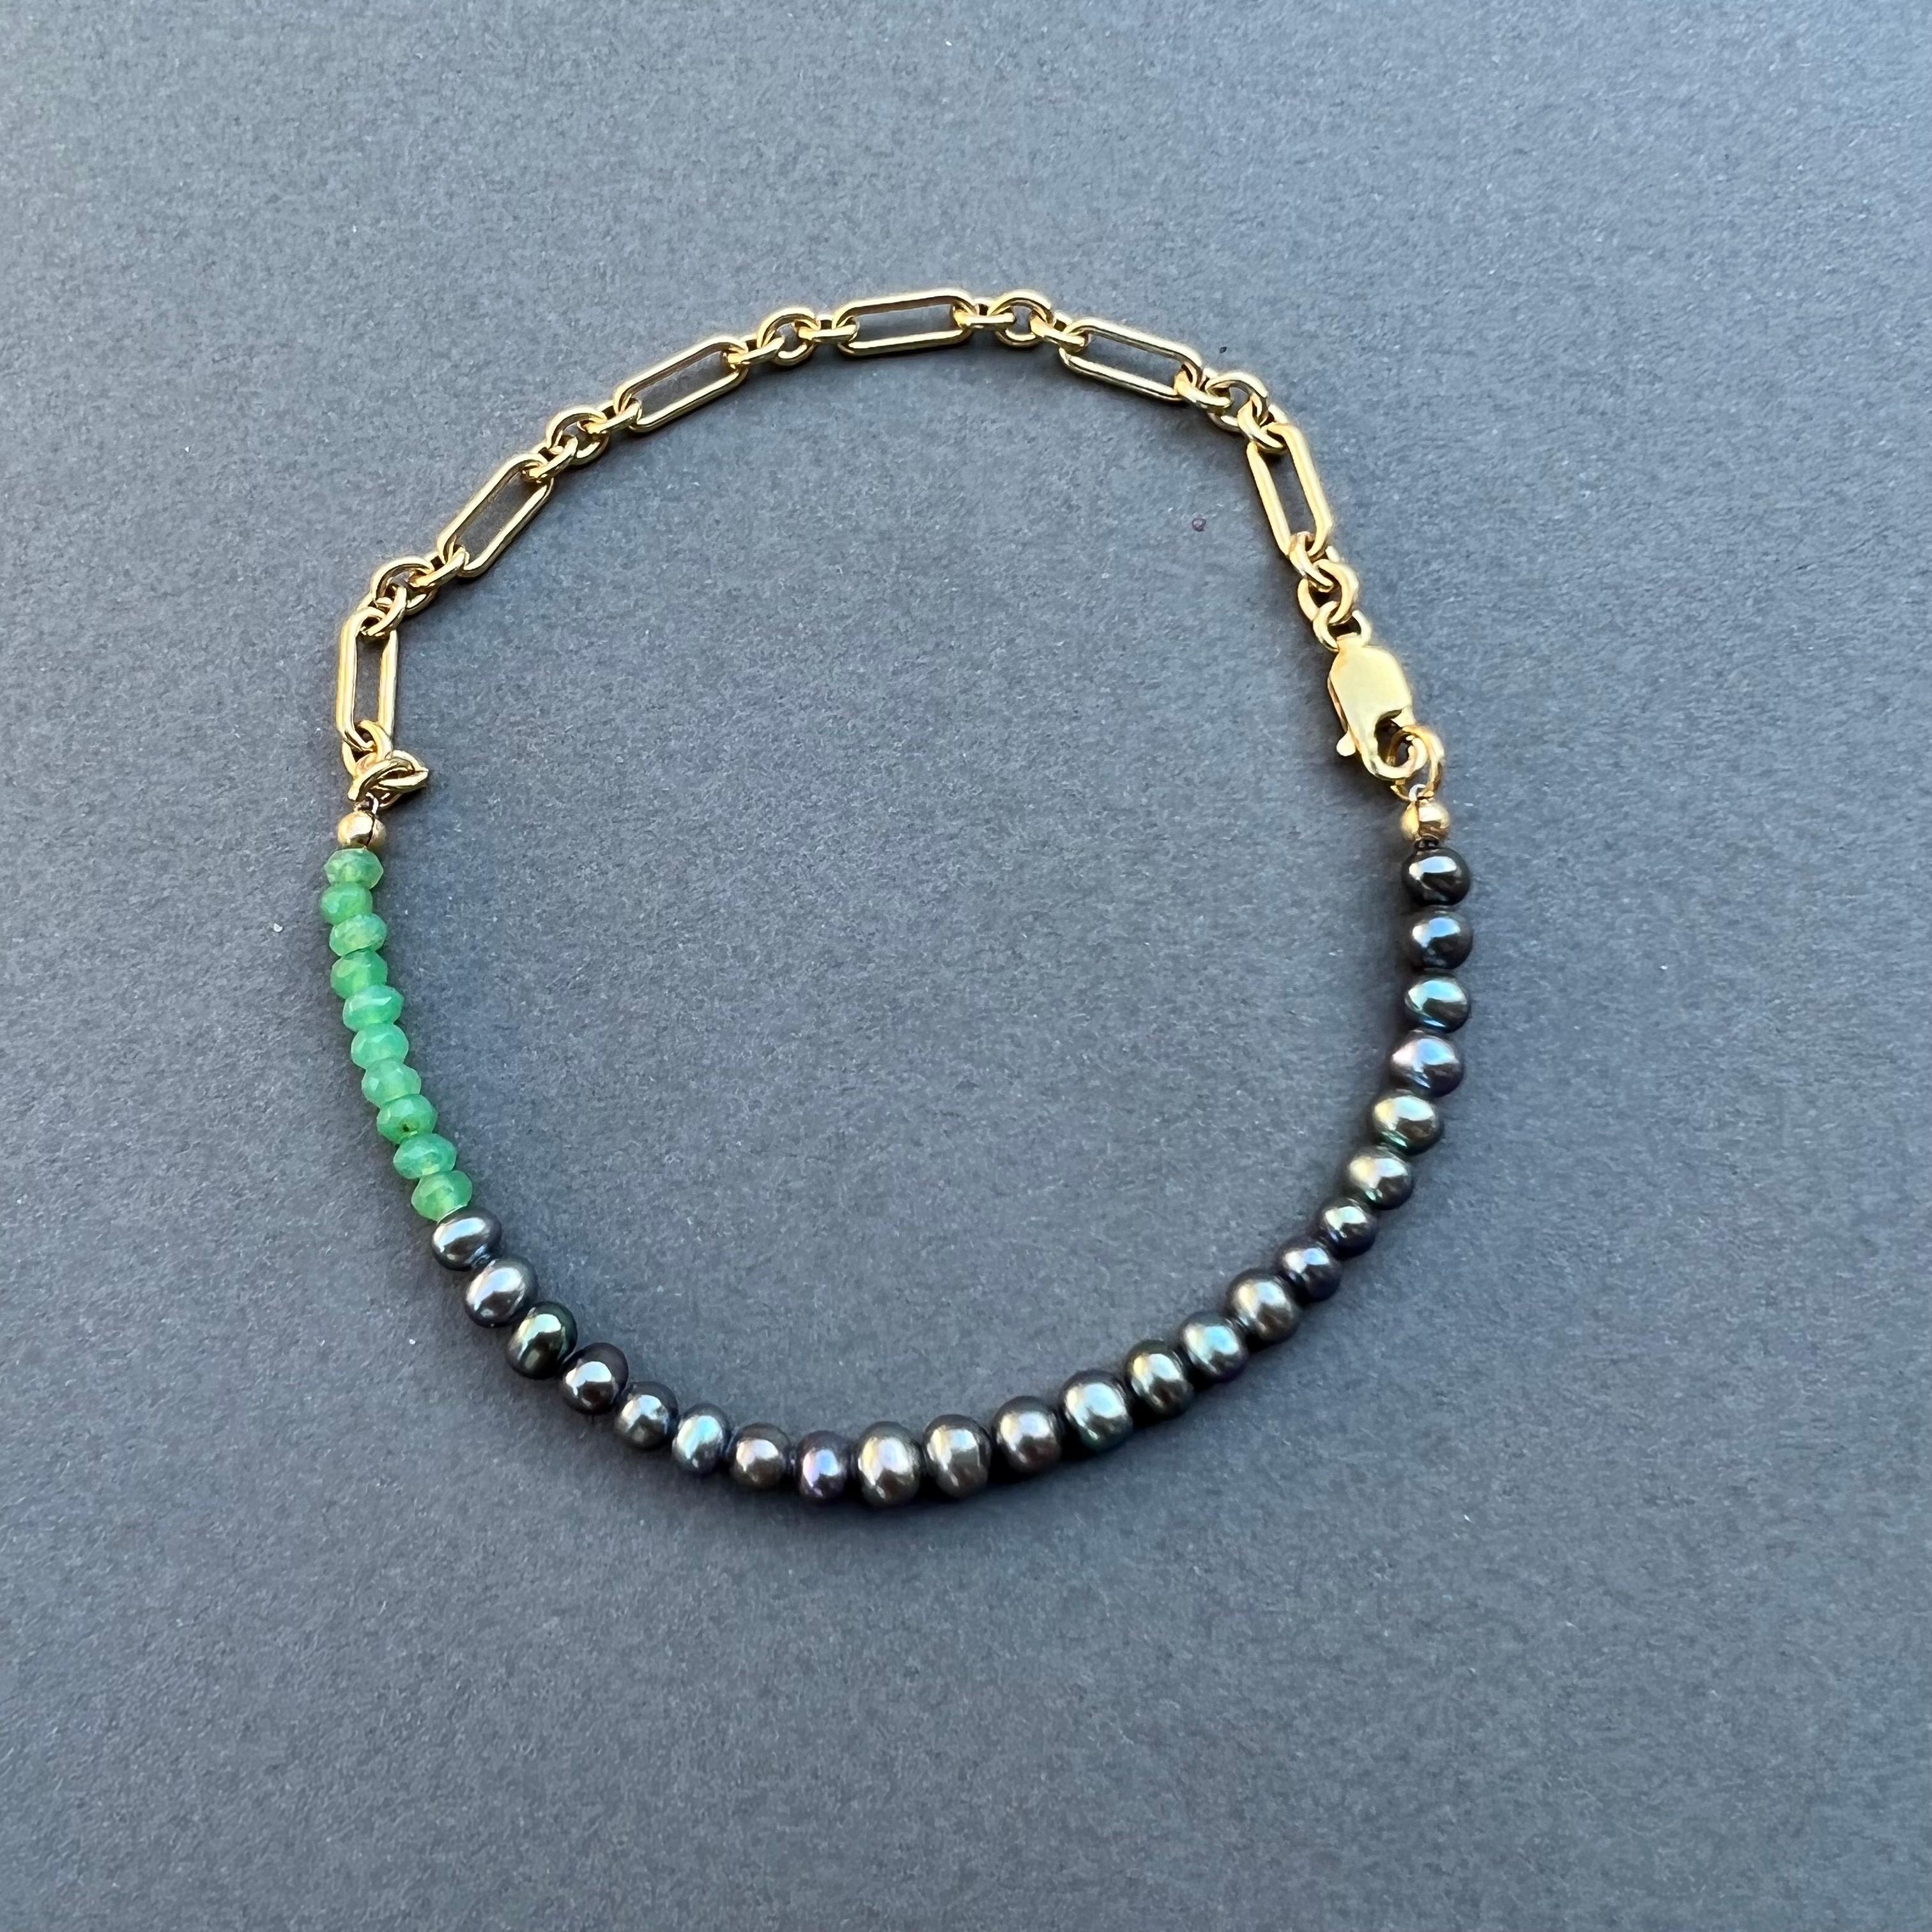 Black Pearl Chrysoprase Bracelet Chain J Dauphin In New Condition For Sale In Los Angeles, CA